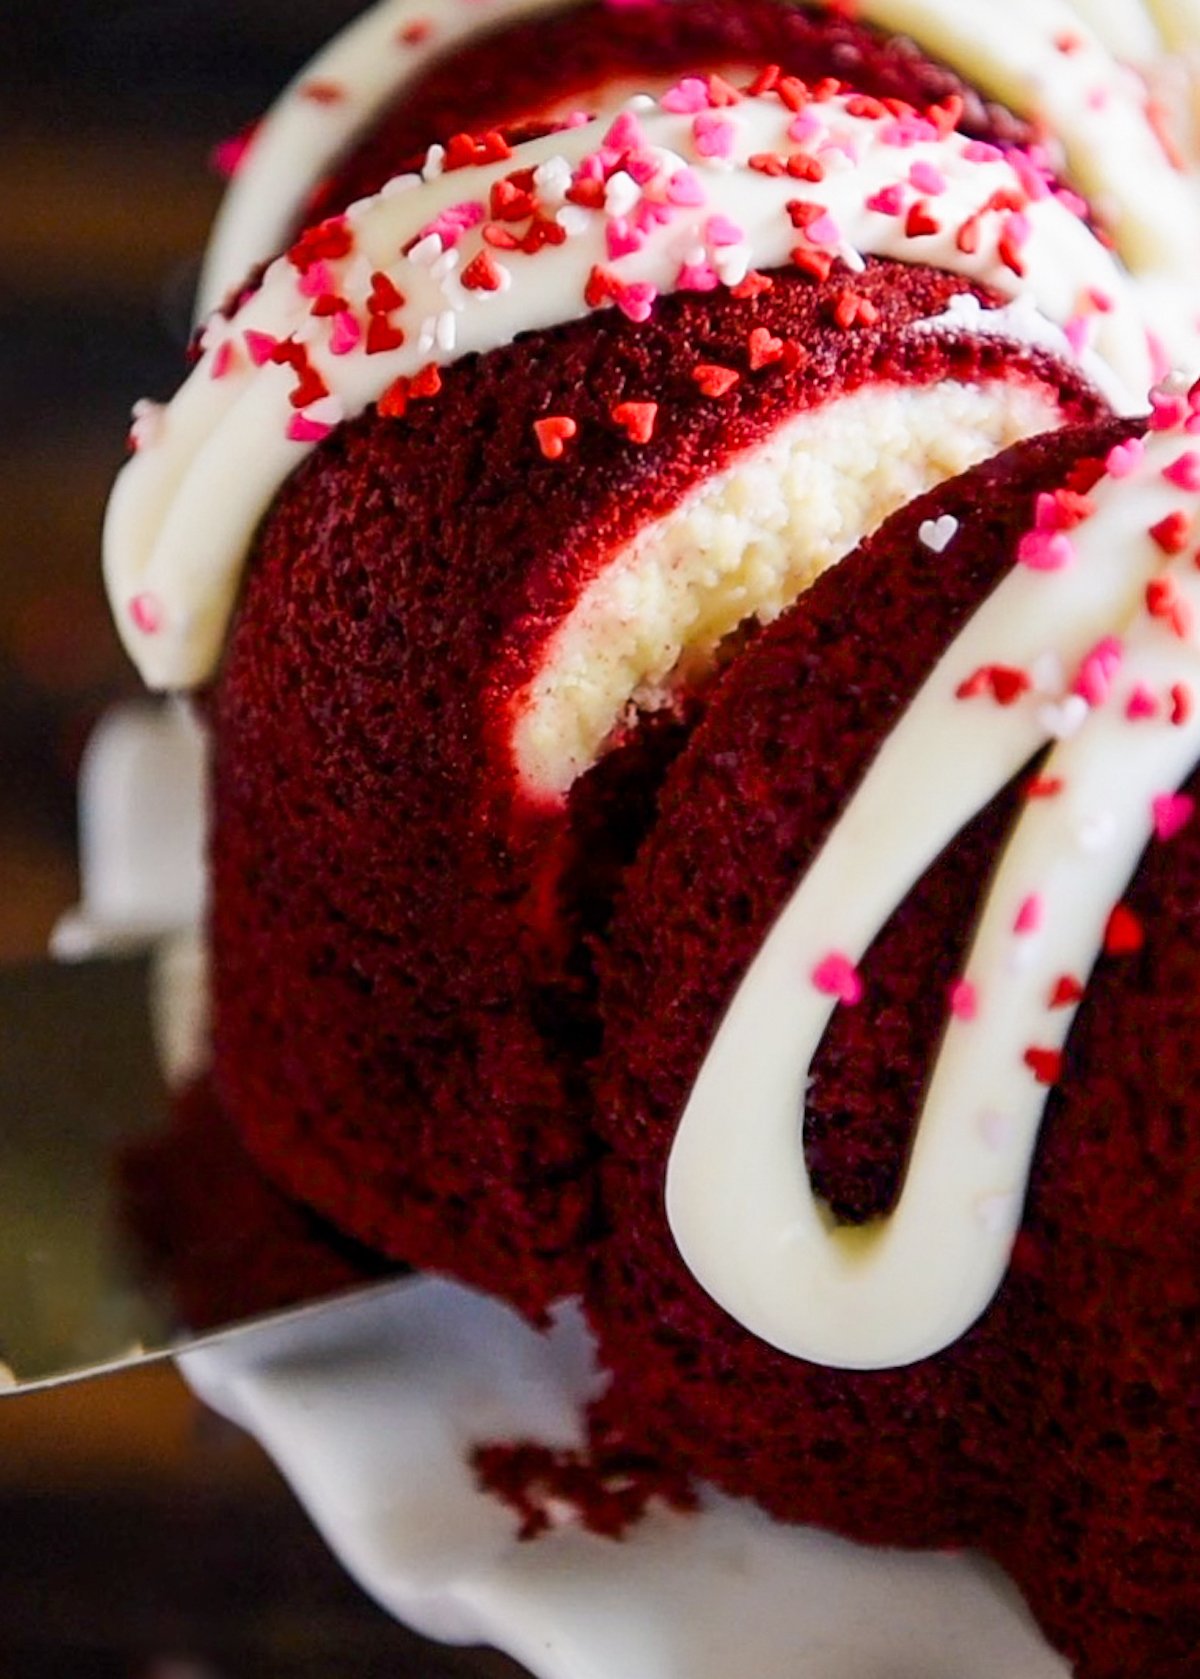 A slice of red velvet cream cheese bundt cake being lifted with a serving spatula from the cake.